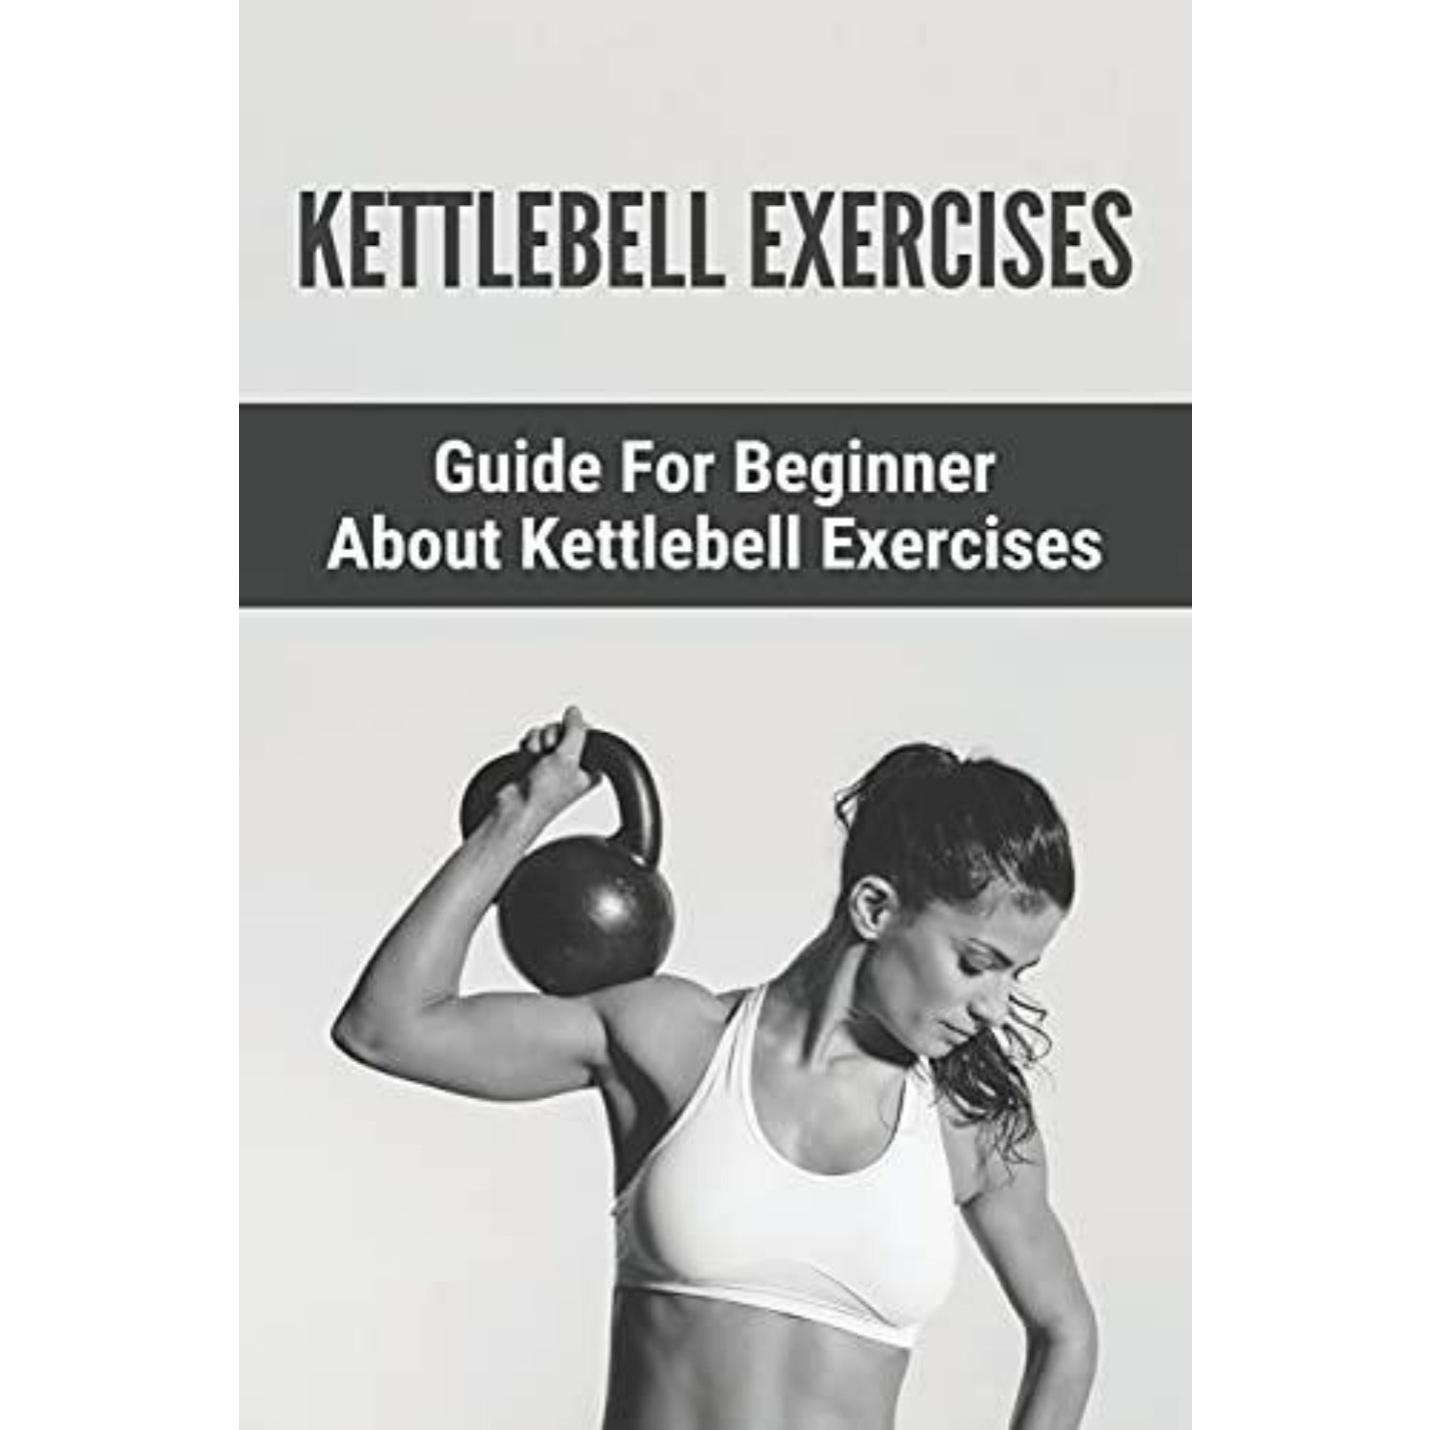 Kettlebell Exercises: Guide For Beginner About Kettlebell Exercises: : Kettlebell 8Kg - kettlebell oefeningen - happygetfit.com